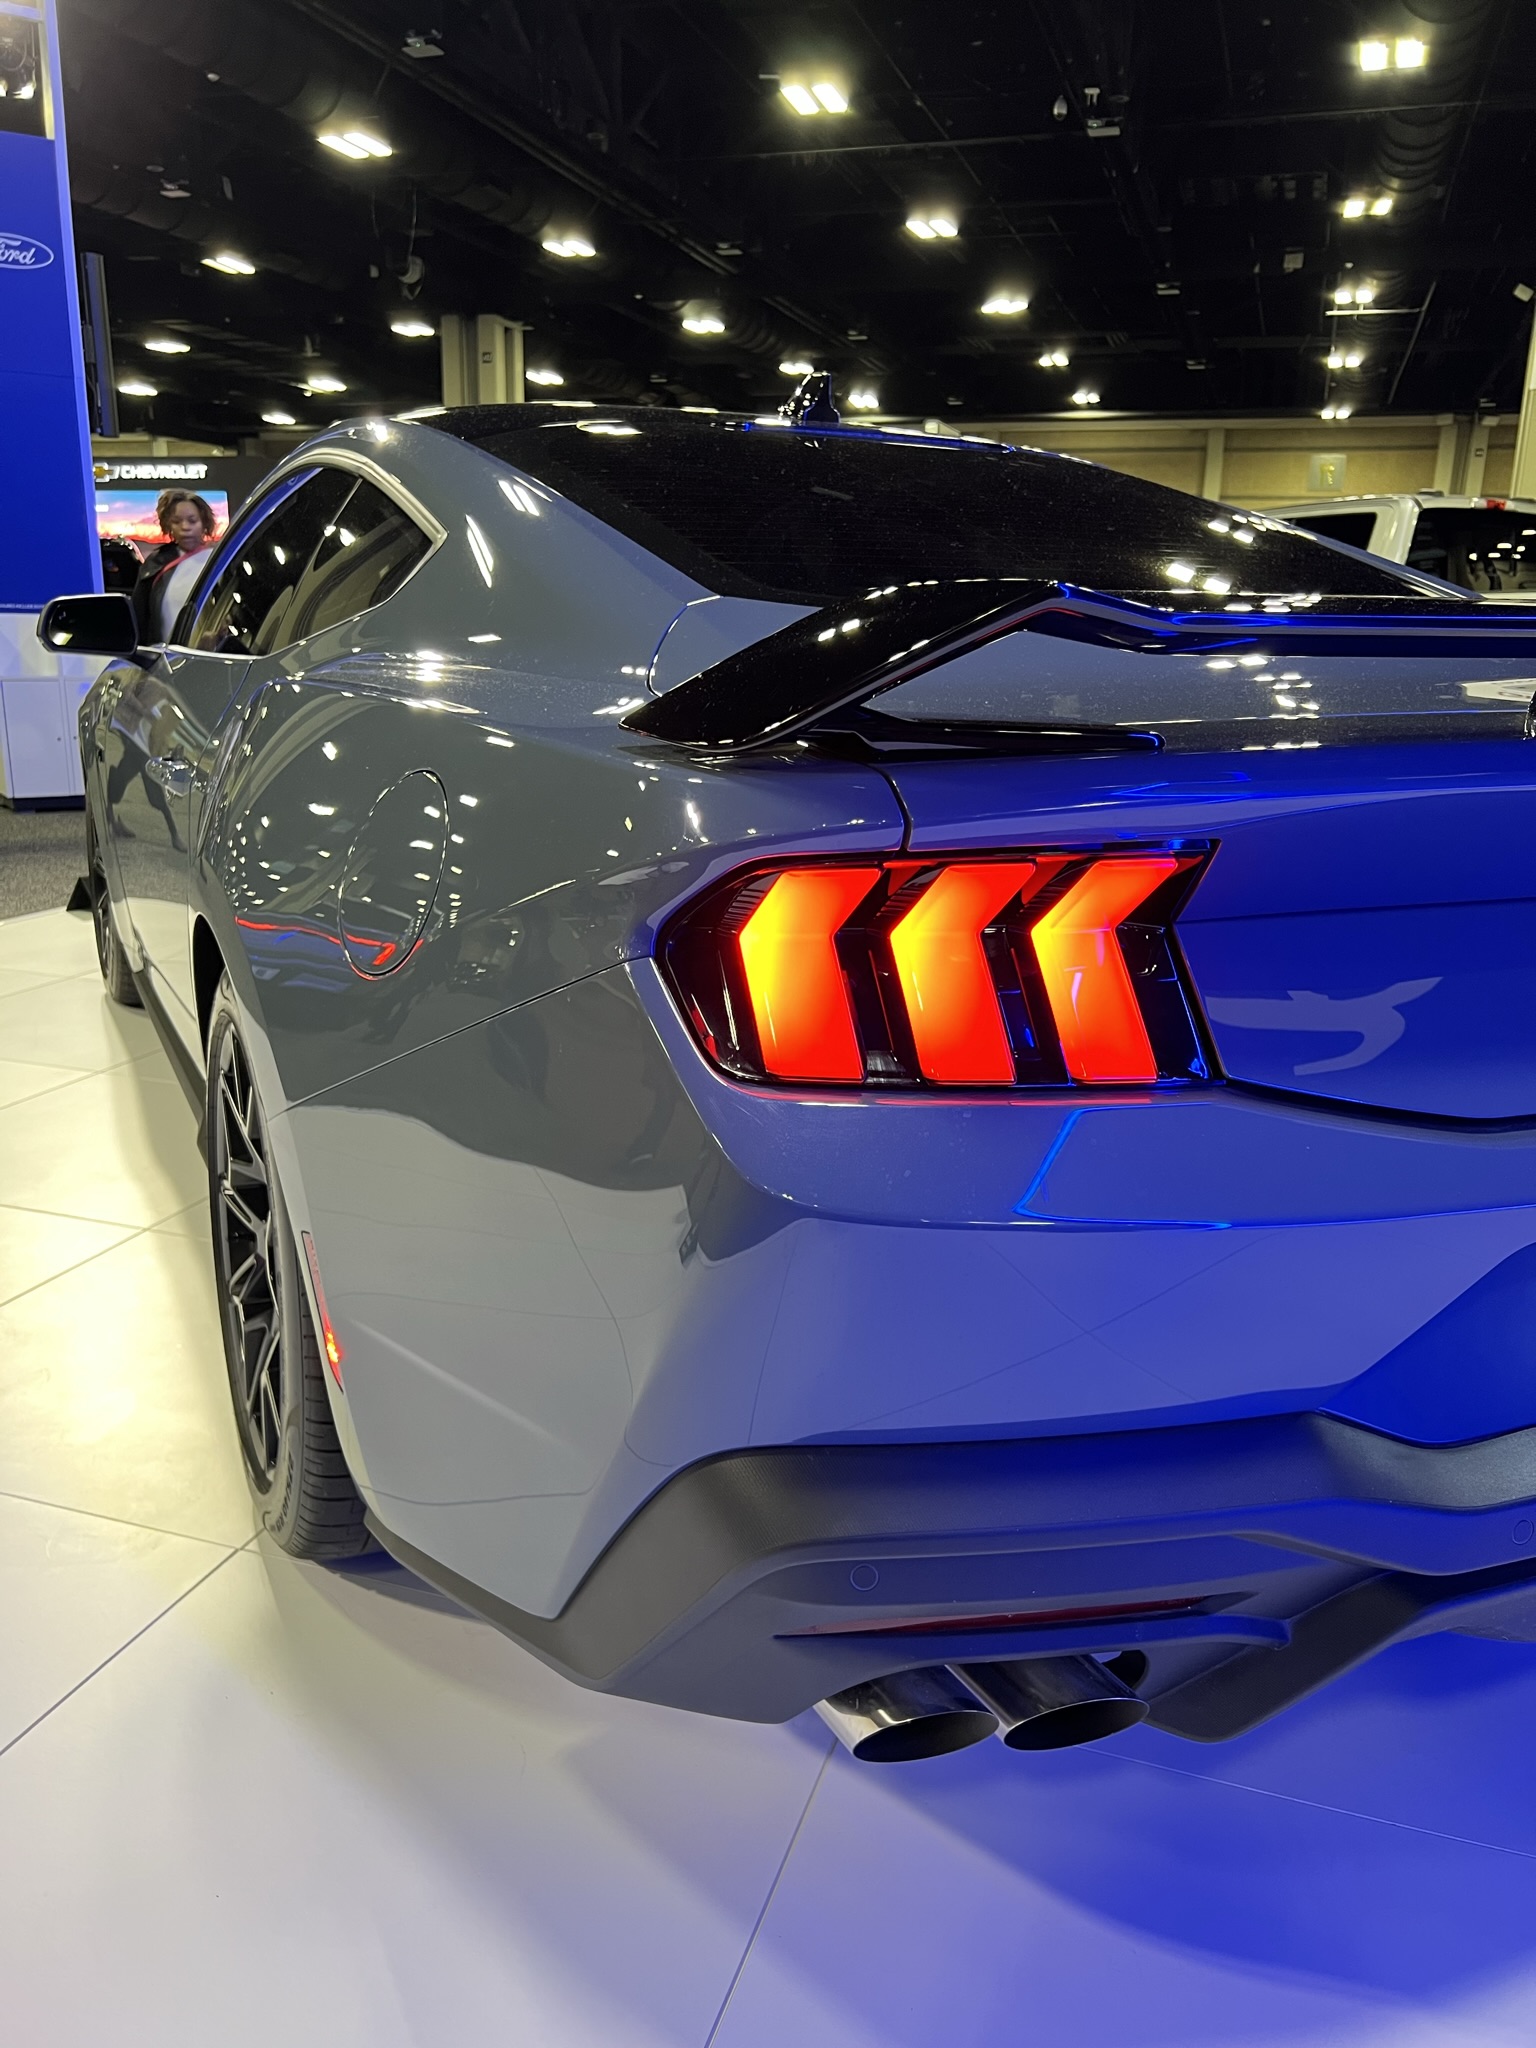 S650 Mustang S650 GT @ Charlotte Auto Show IMG_1810.JPEG